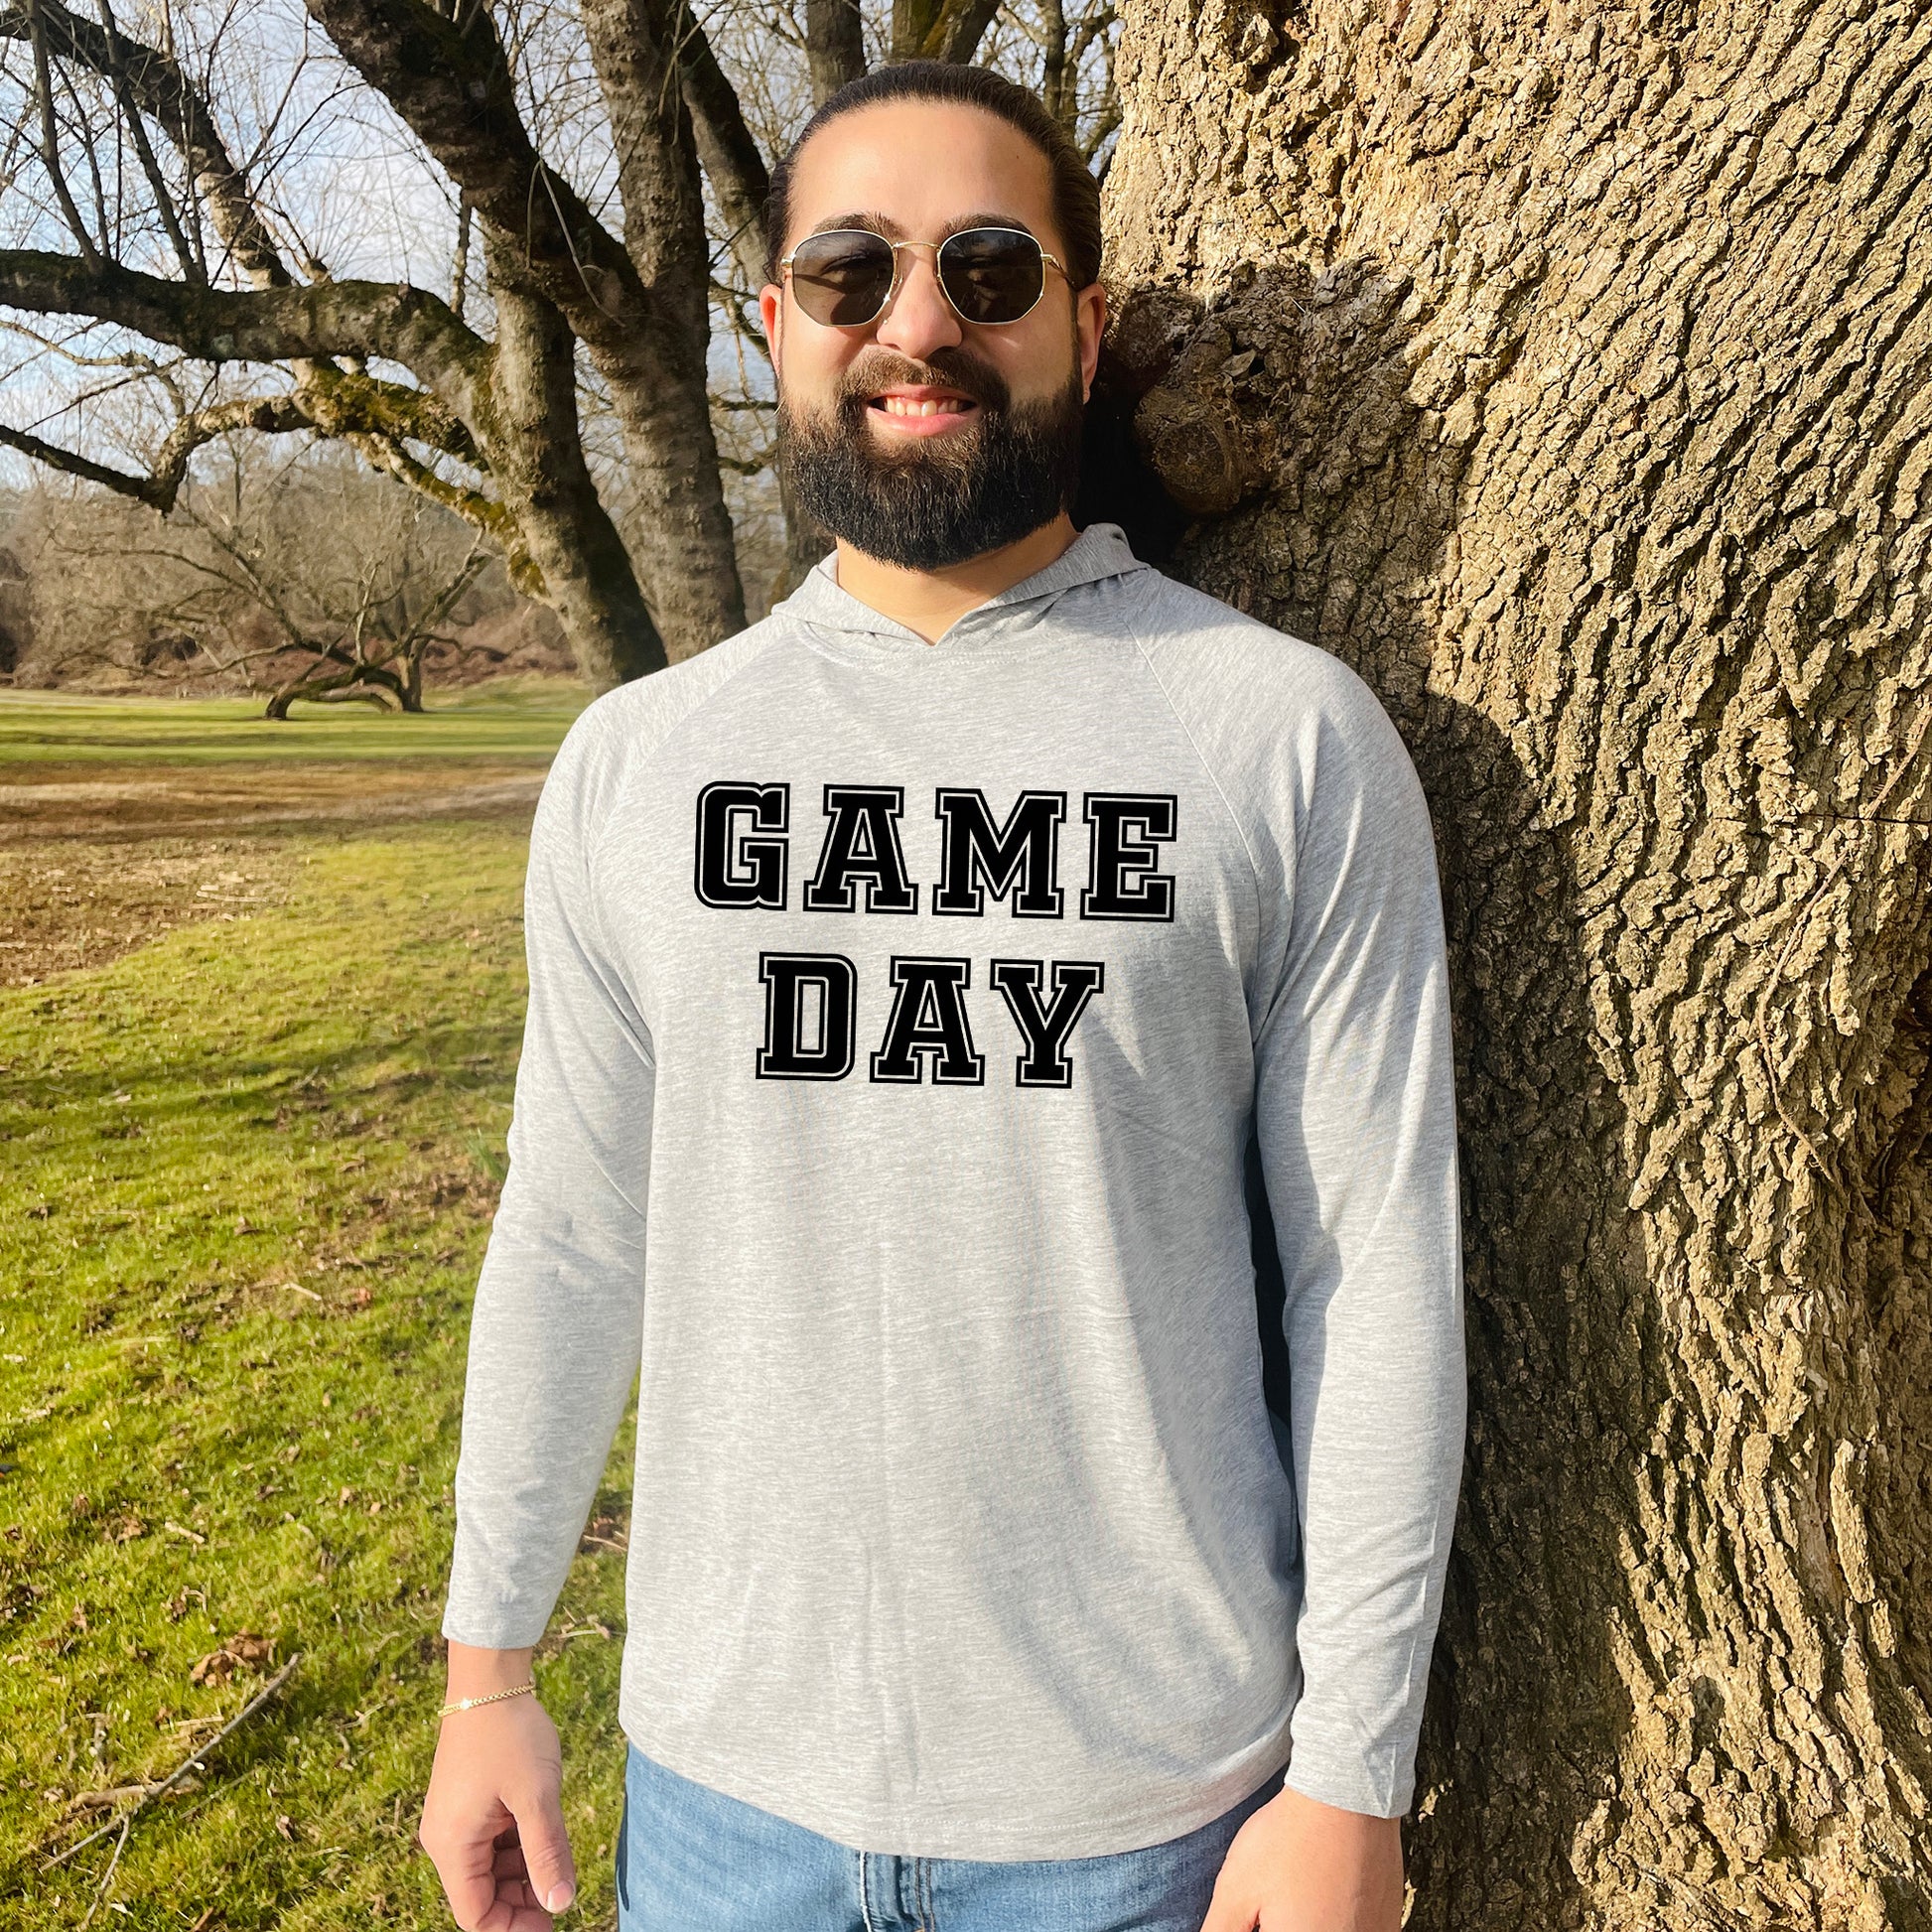 a man standing next to a tree with a game day shirt on